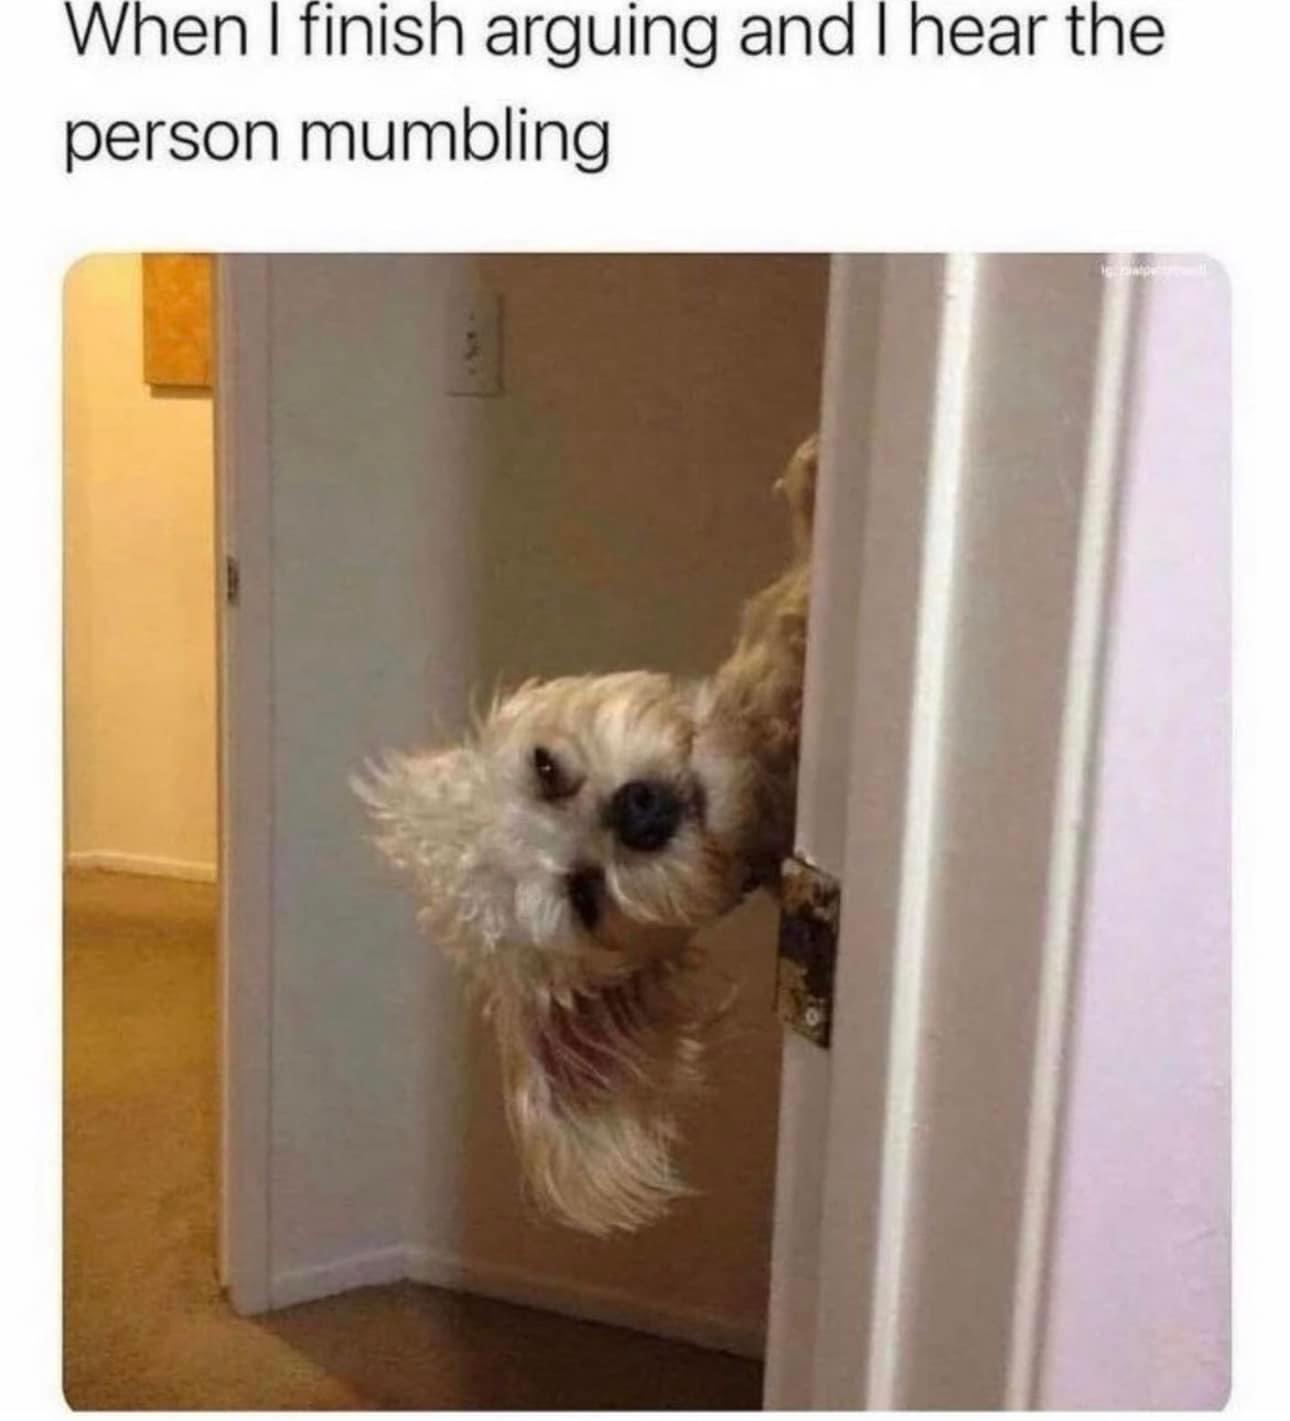 dank memes - dog - When I finish arguing and I hear the person mumbling 16 Date